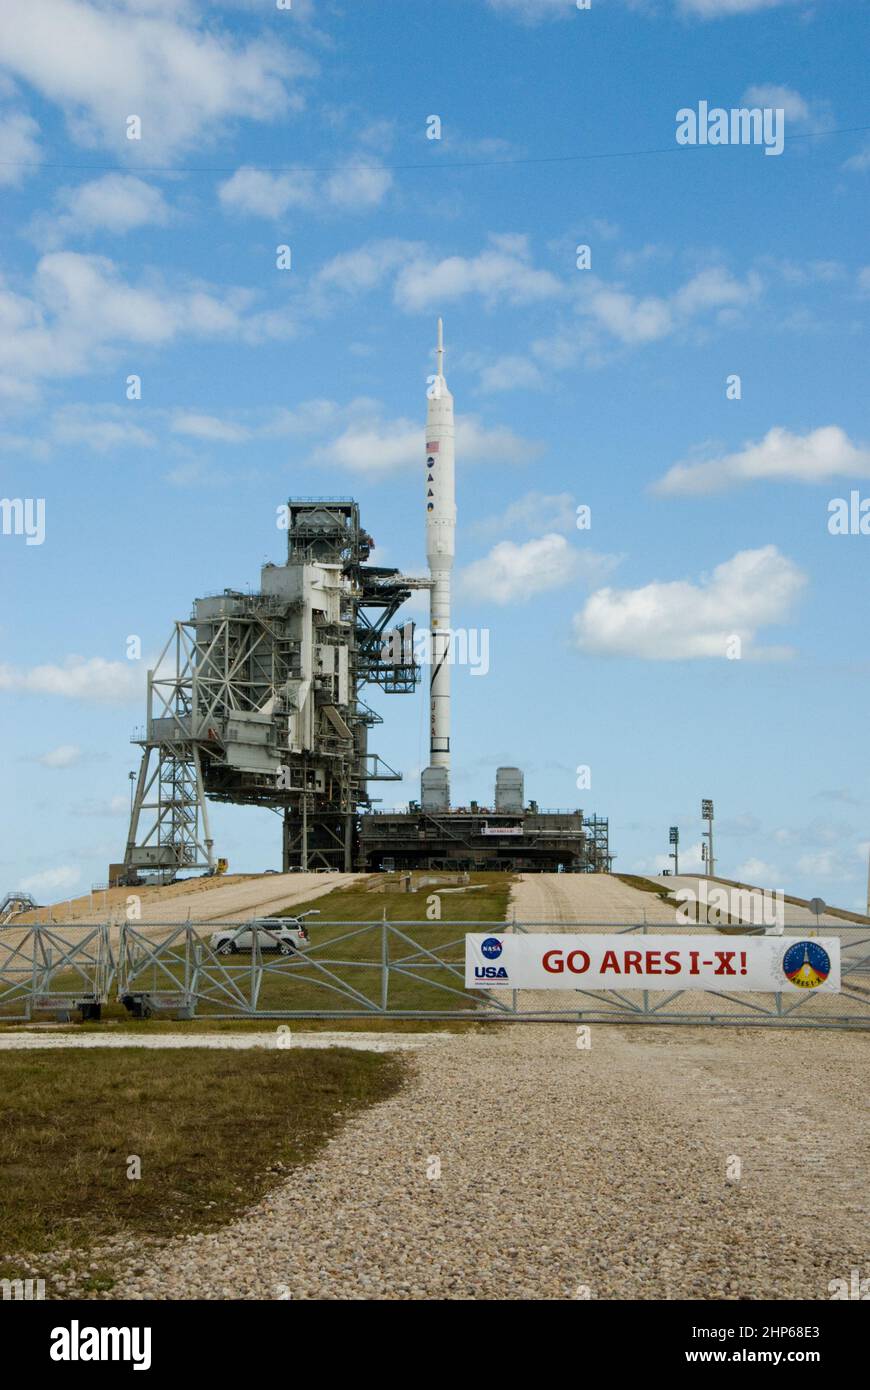 Go Ares I-X! A banner on the perimeter fence of Launch Pad 39B at NASA's Kennedy Space Center in Florida reflects the excitement building in Kennedy's work force in anticipation of the flight test of the towering 327-foot-tall Ares I-X rocket ca. 2009 Stock Photo